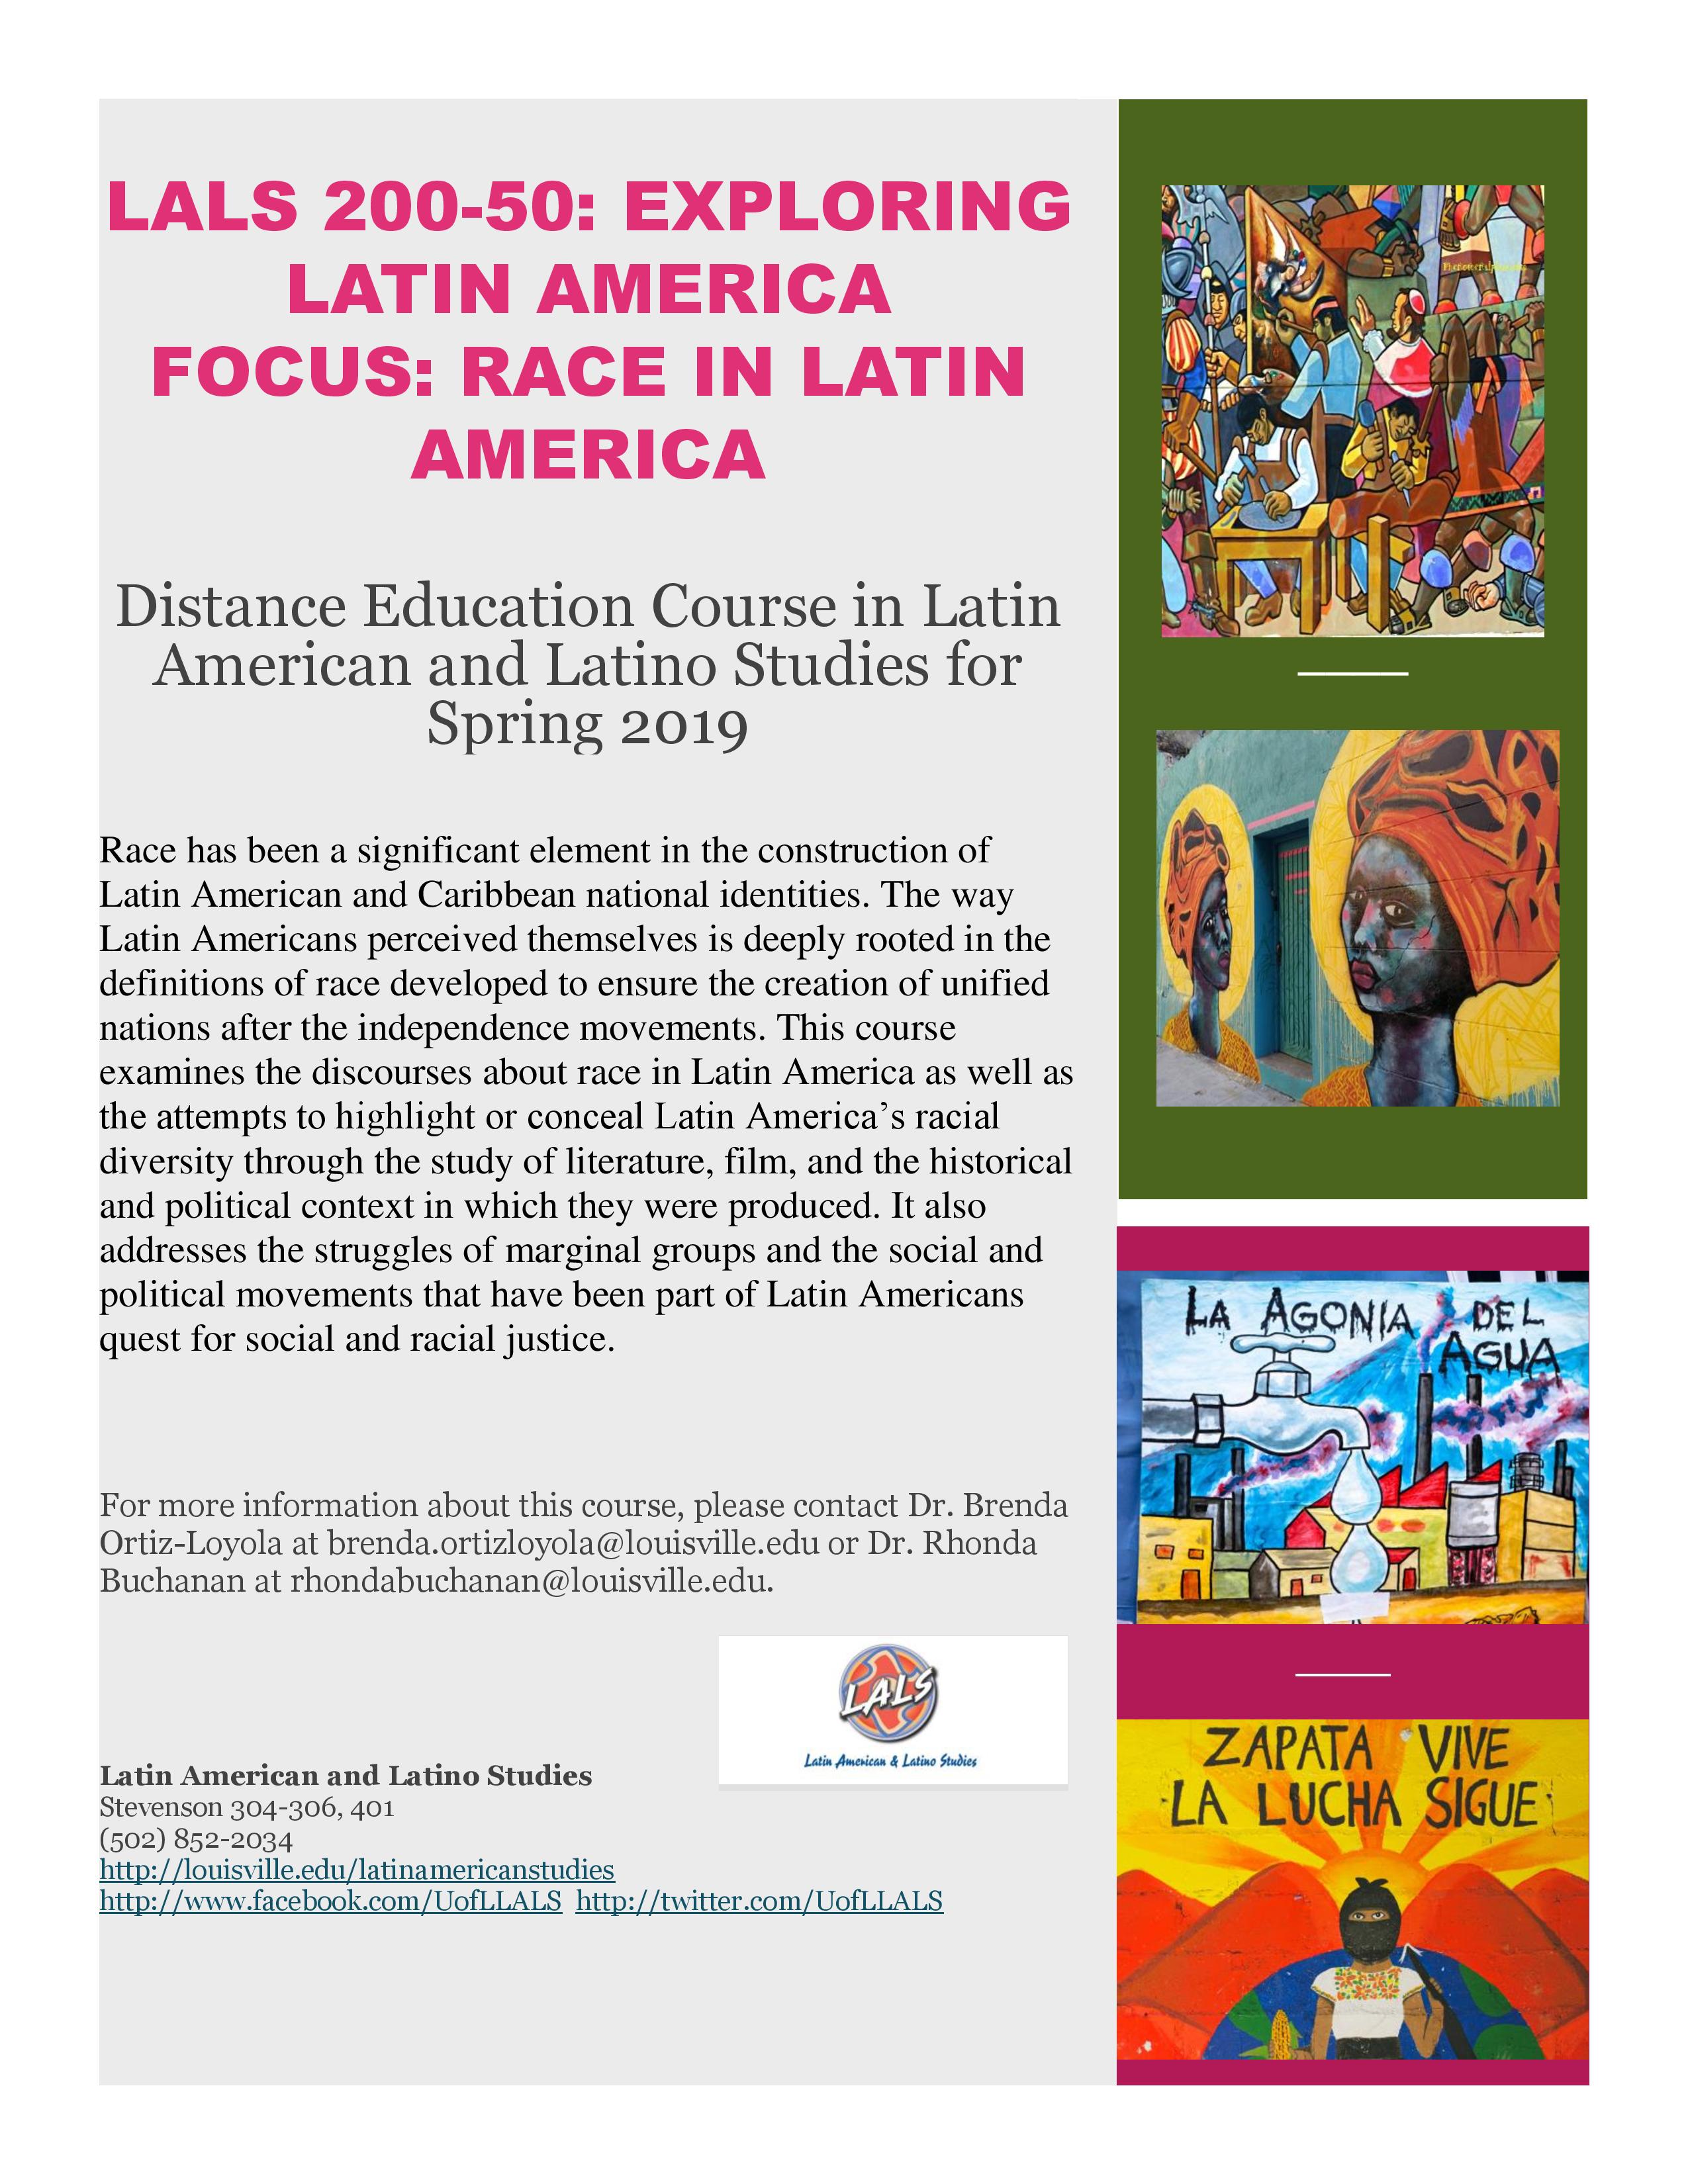 New Spring 2019 LALS Course Offered (LALS 200-50)